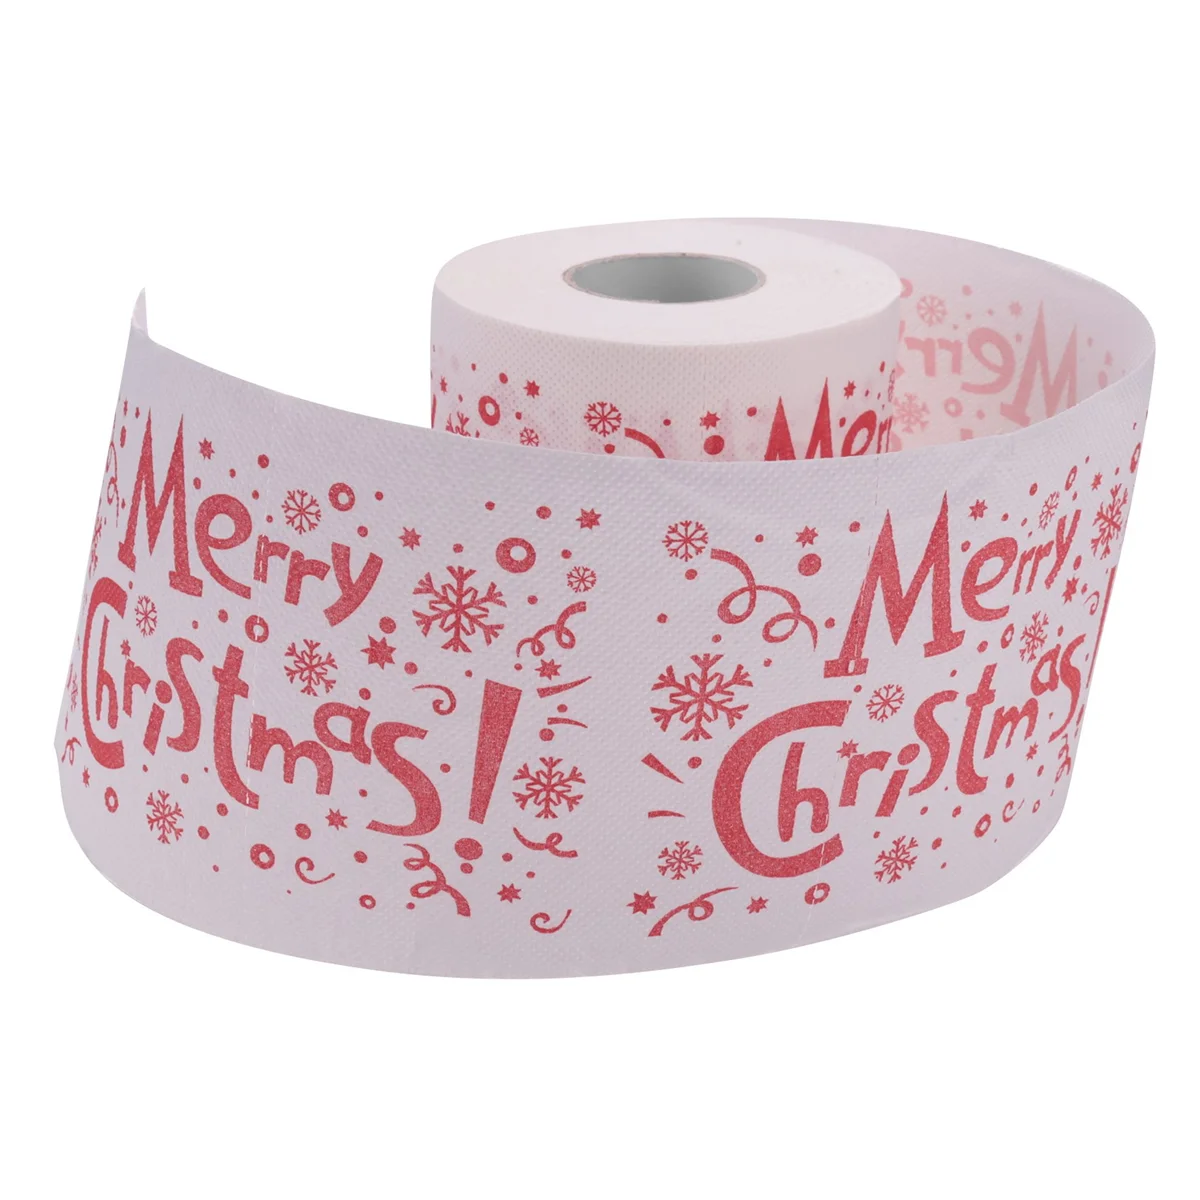 

5 Styles Santa Claus Paper Roll Tissue Paper Towels Christmas Decorations Xmas Santa Office Room Toilet Paper 5 Roll